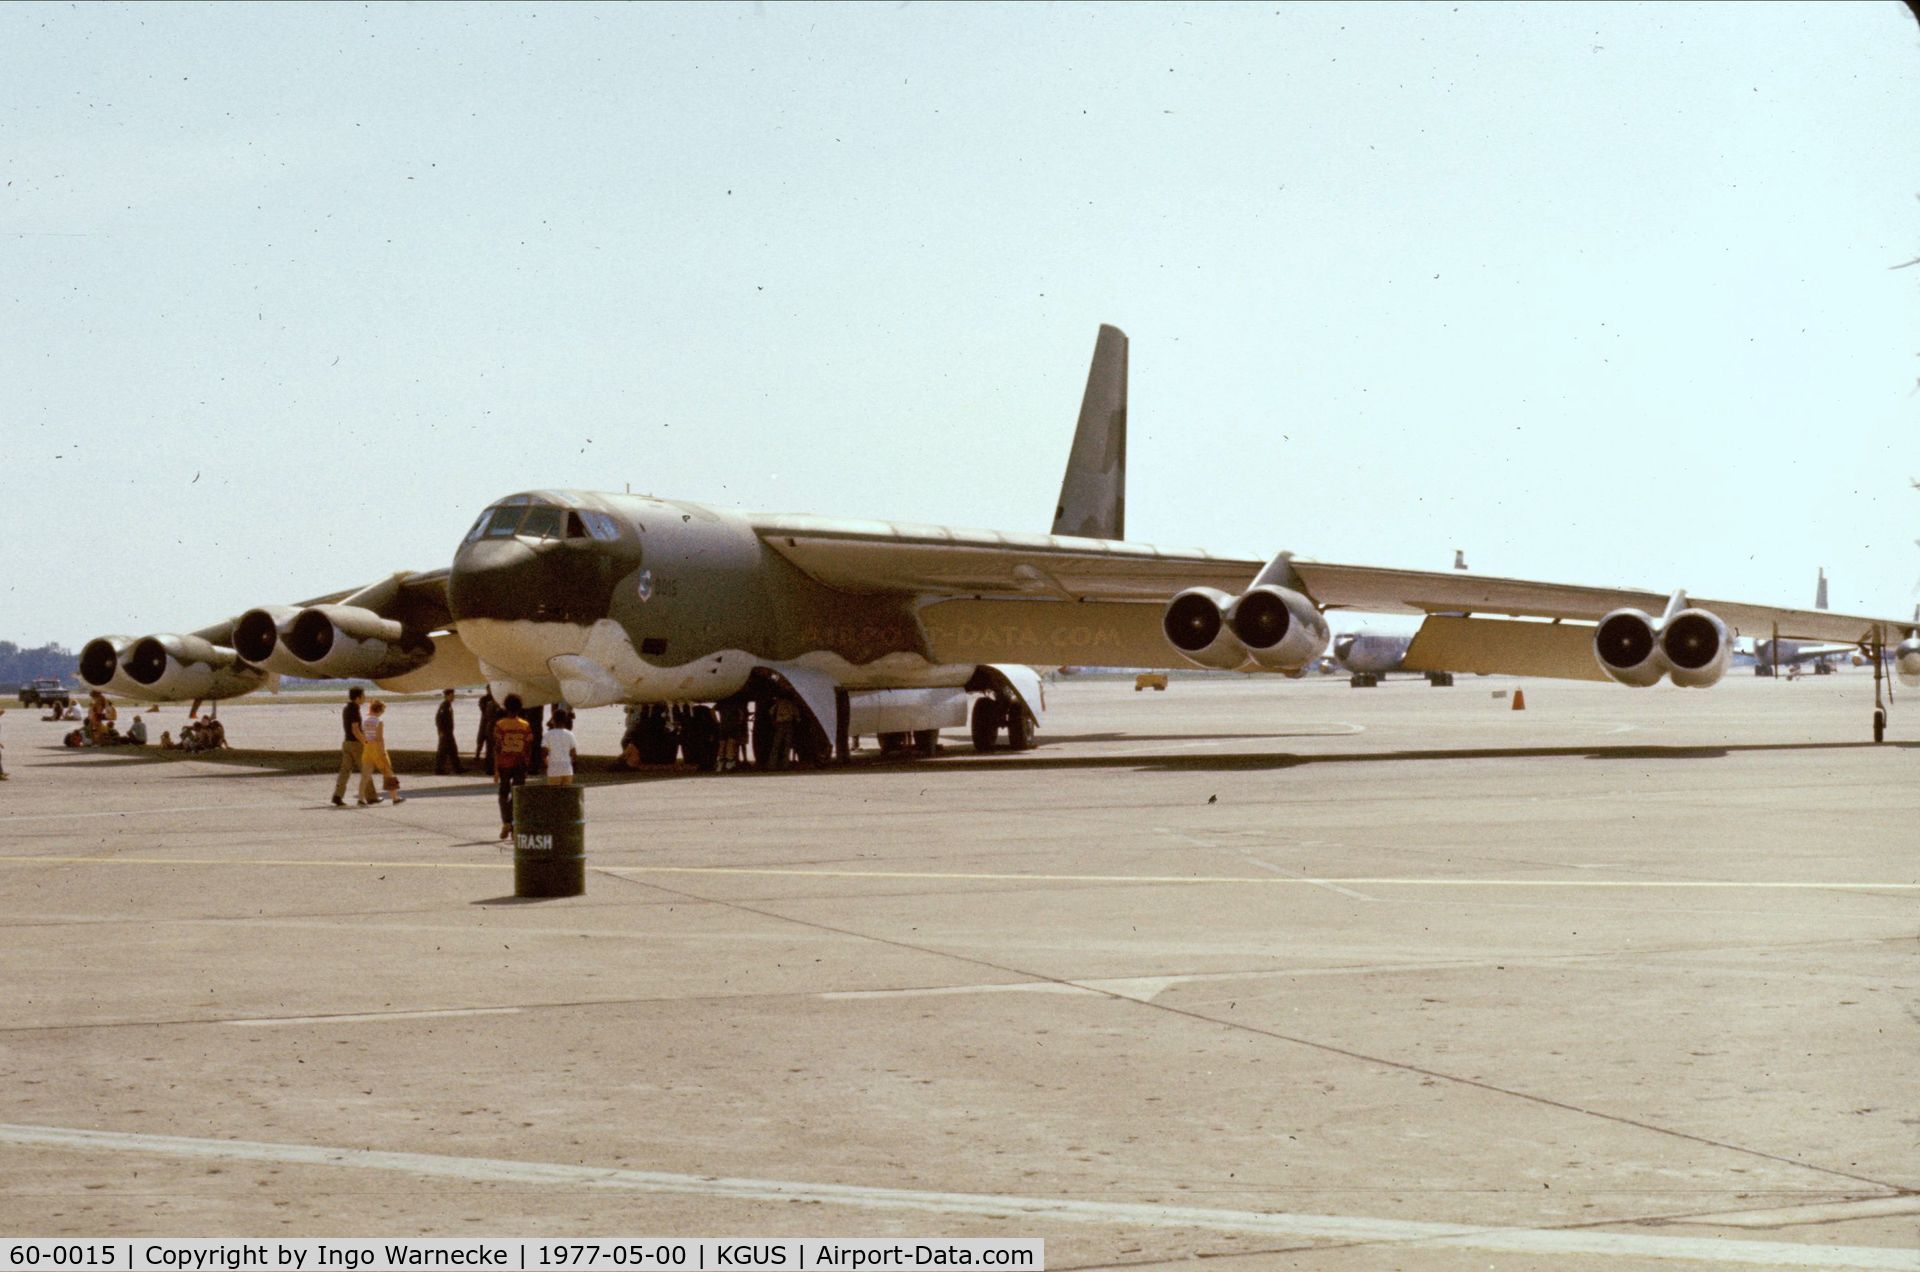 60-0015, 1960 Boeing B-52H Stratofortress C/N 464380, Boeing B-52H Stratofortress of the USAF at the 1977 airshow at Grissom AFB, Peru IN